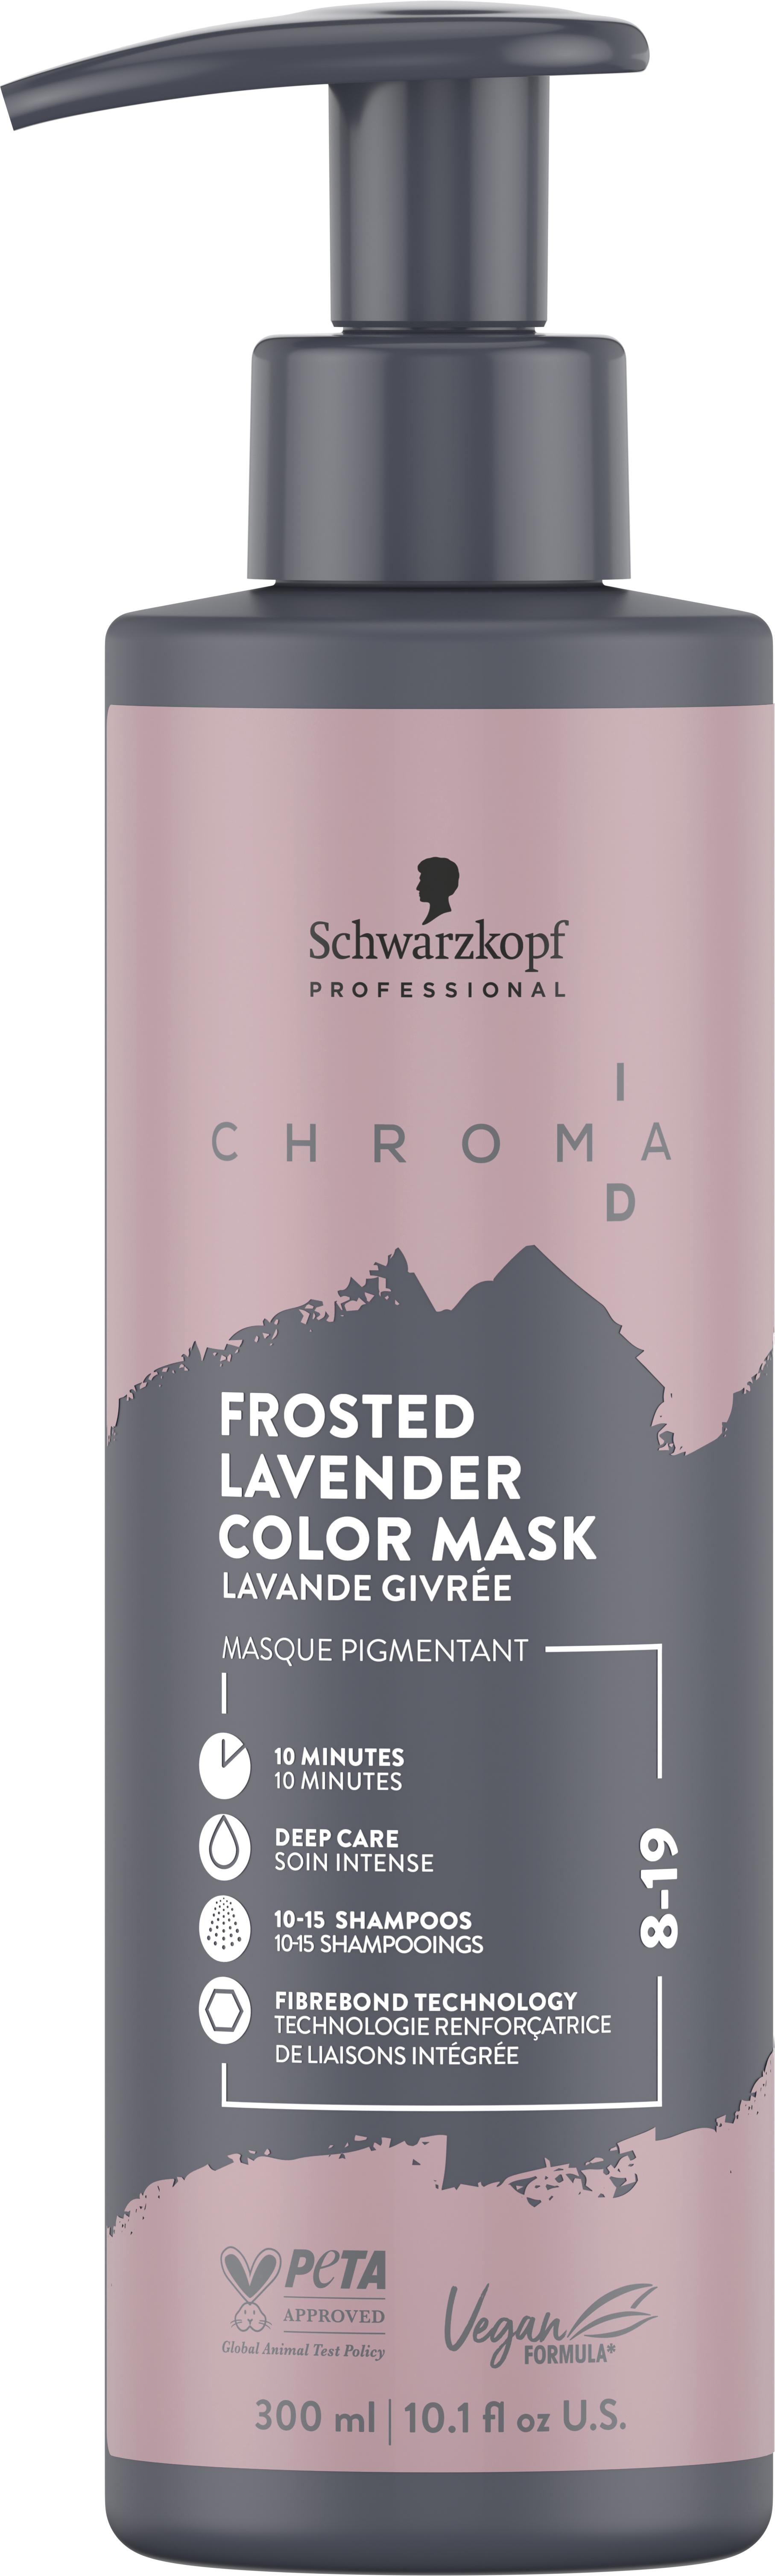 Chroma ID - Bonding Color Mask 8-19 Frosted Lavender